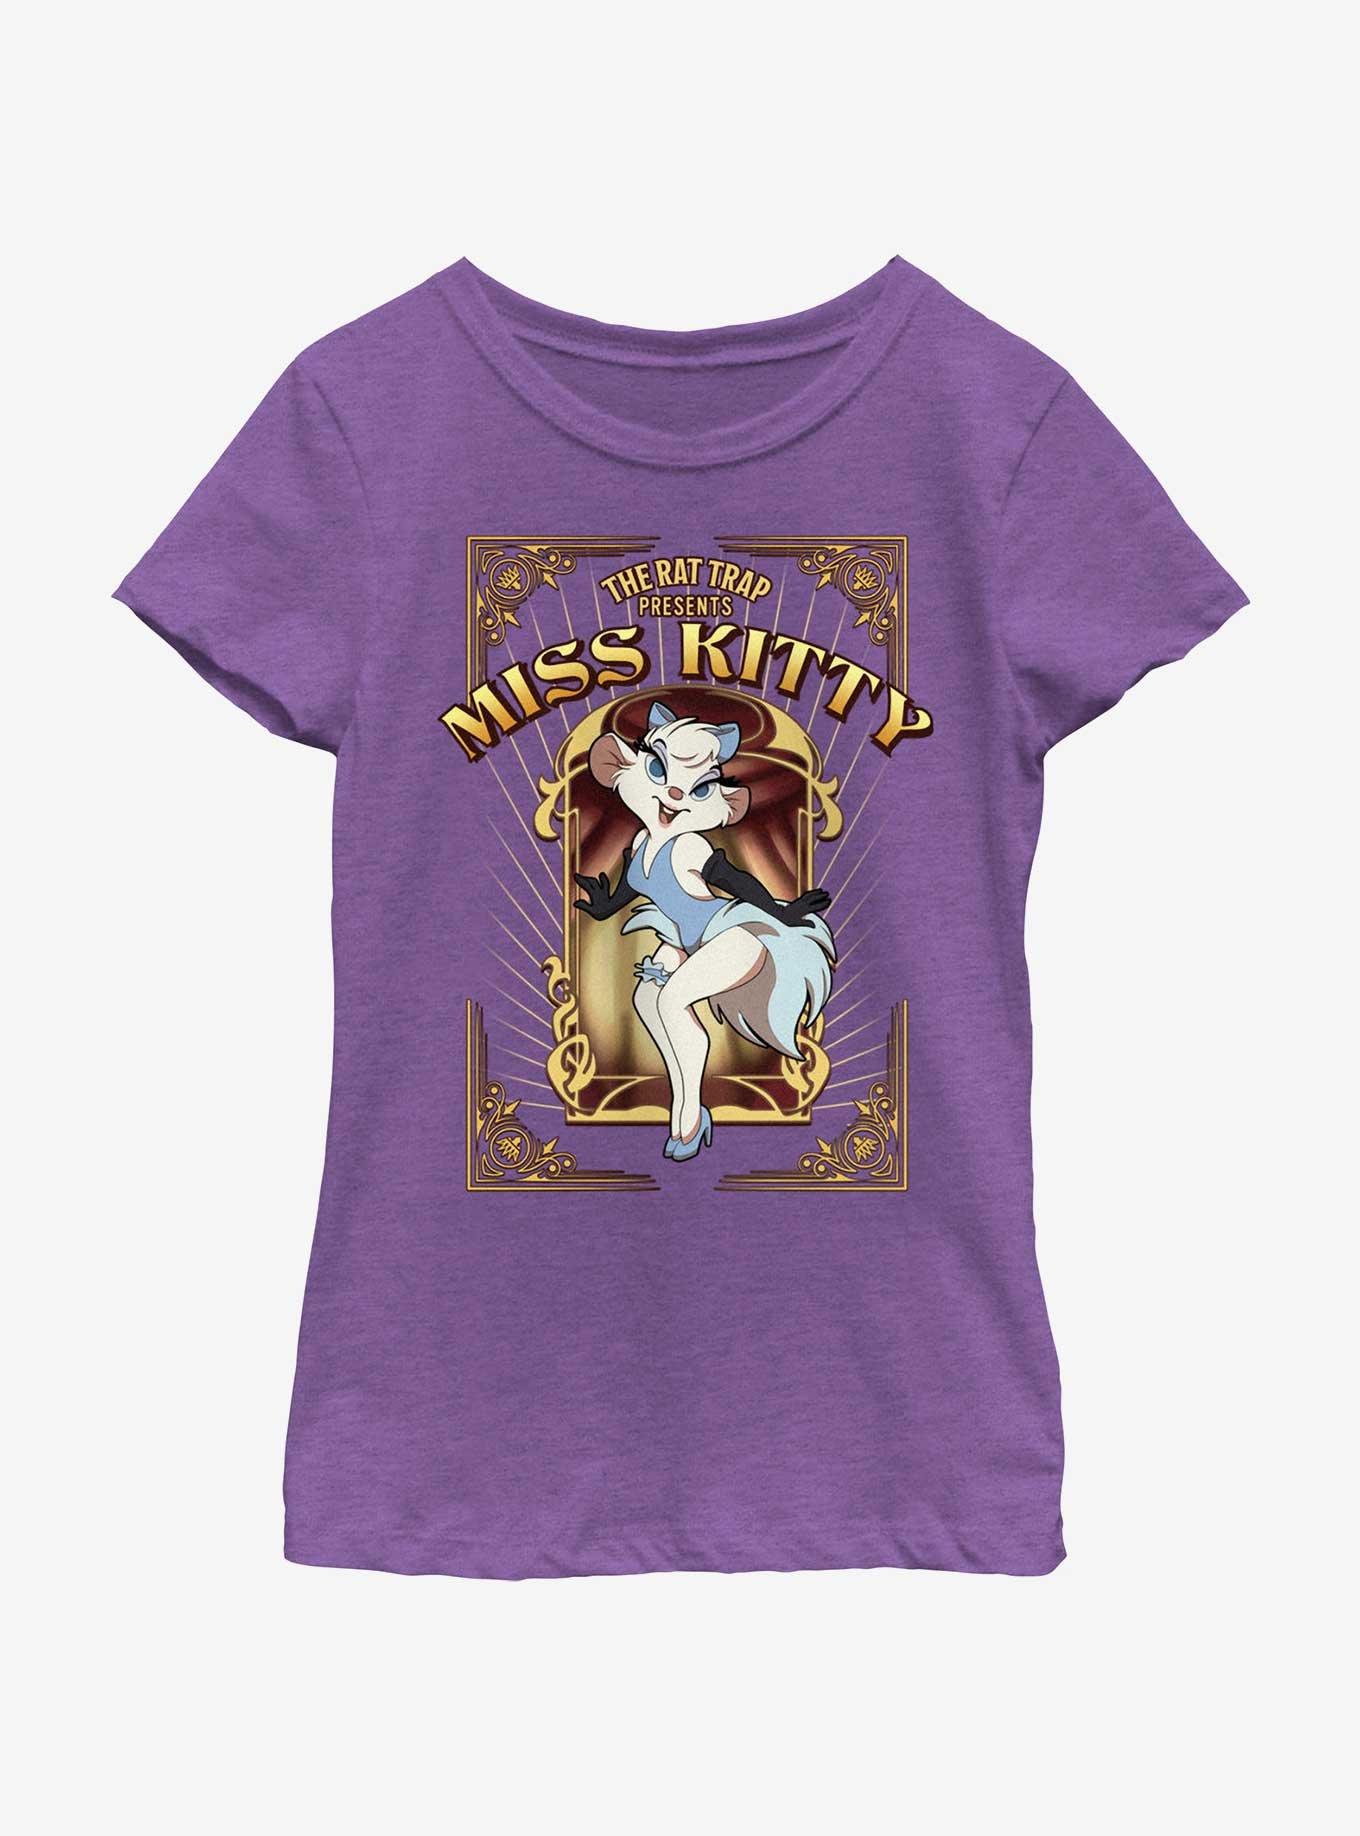 Disney The Great Mouse Detective Miss Kitty Poster Youth Girls T-Shirt, PURPLE BERRY, hi-res